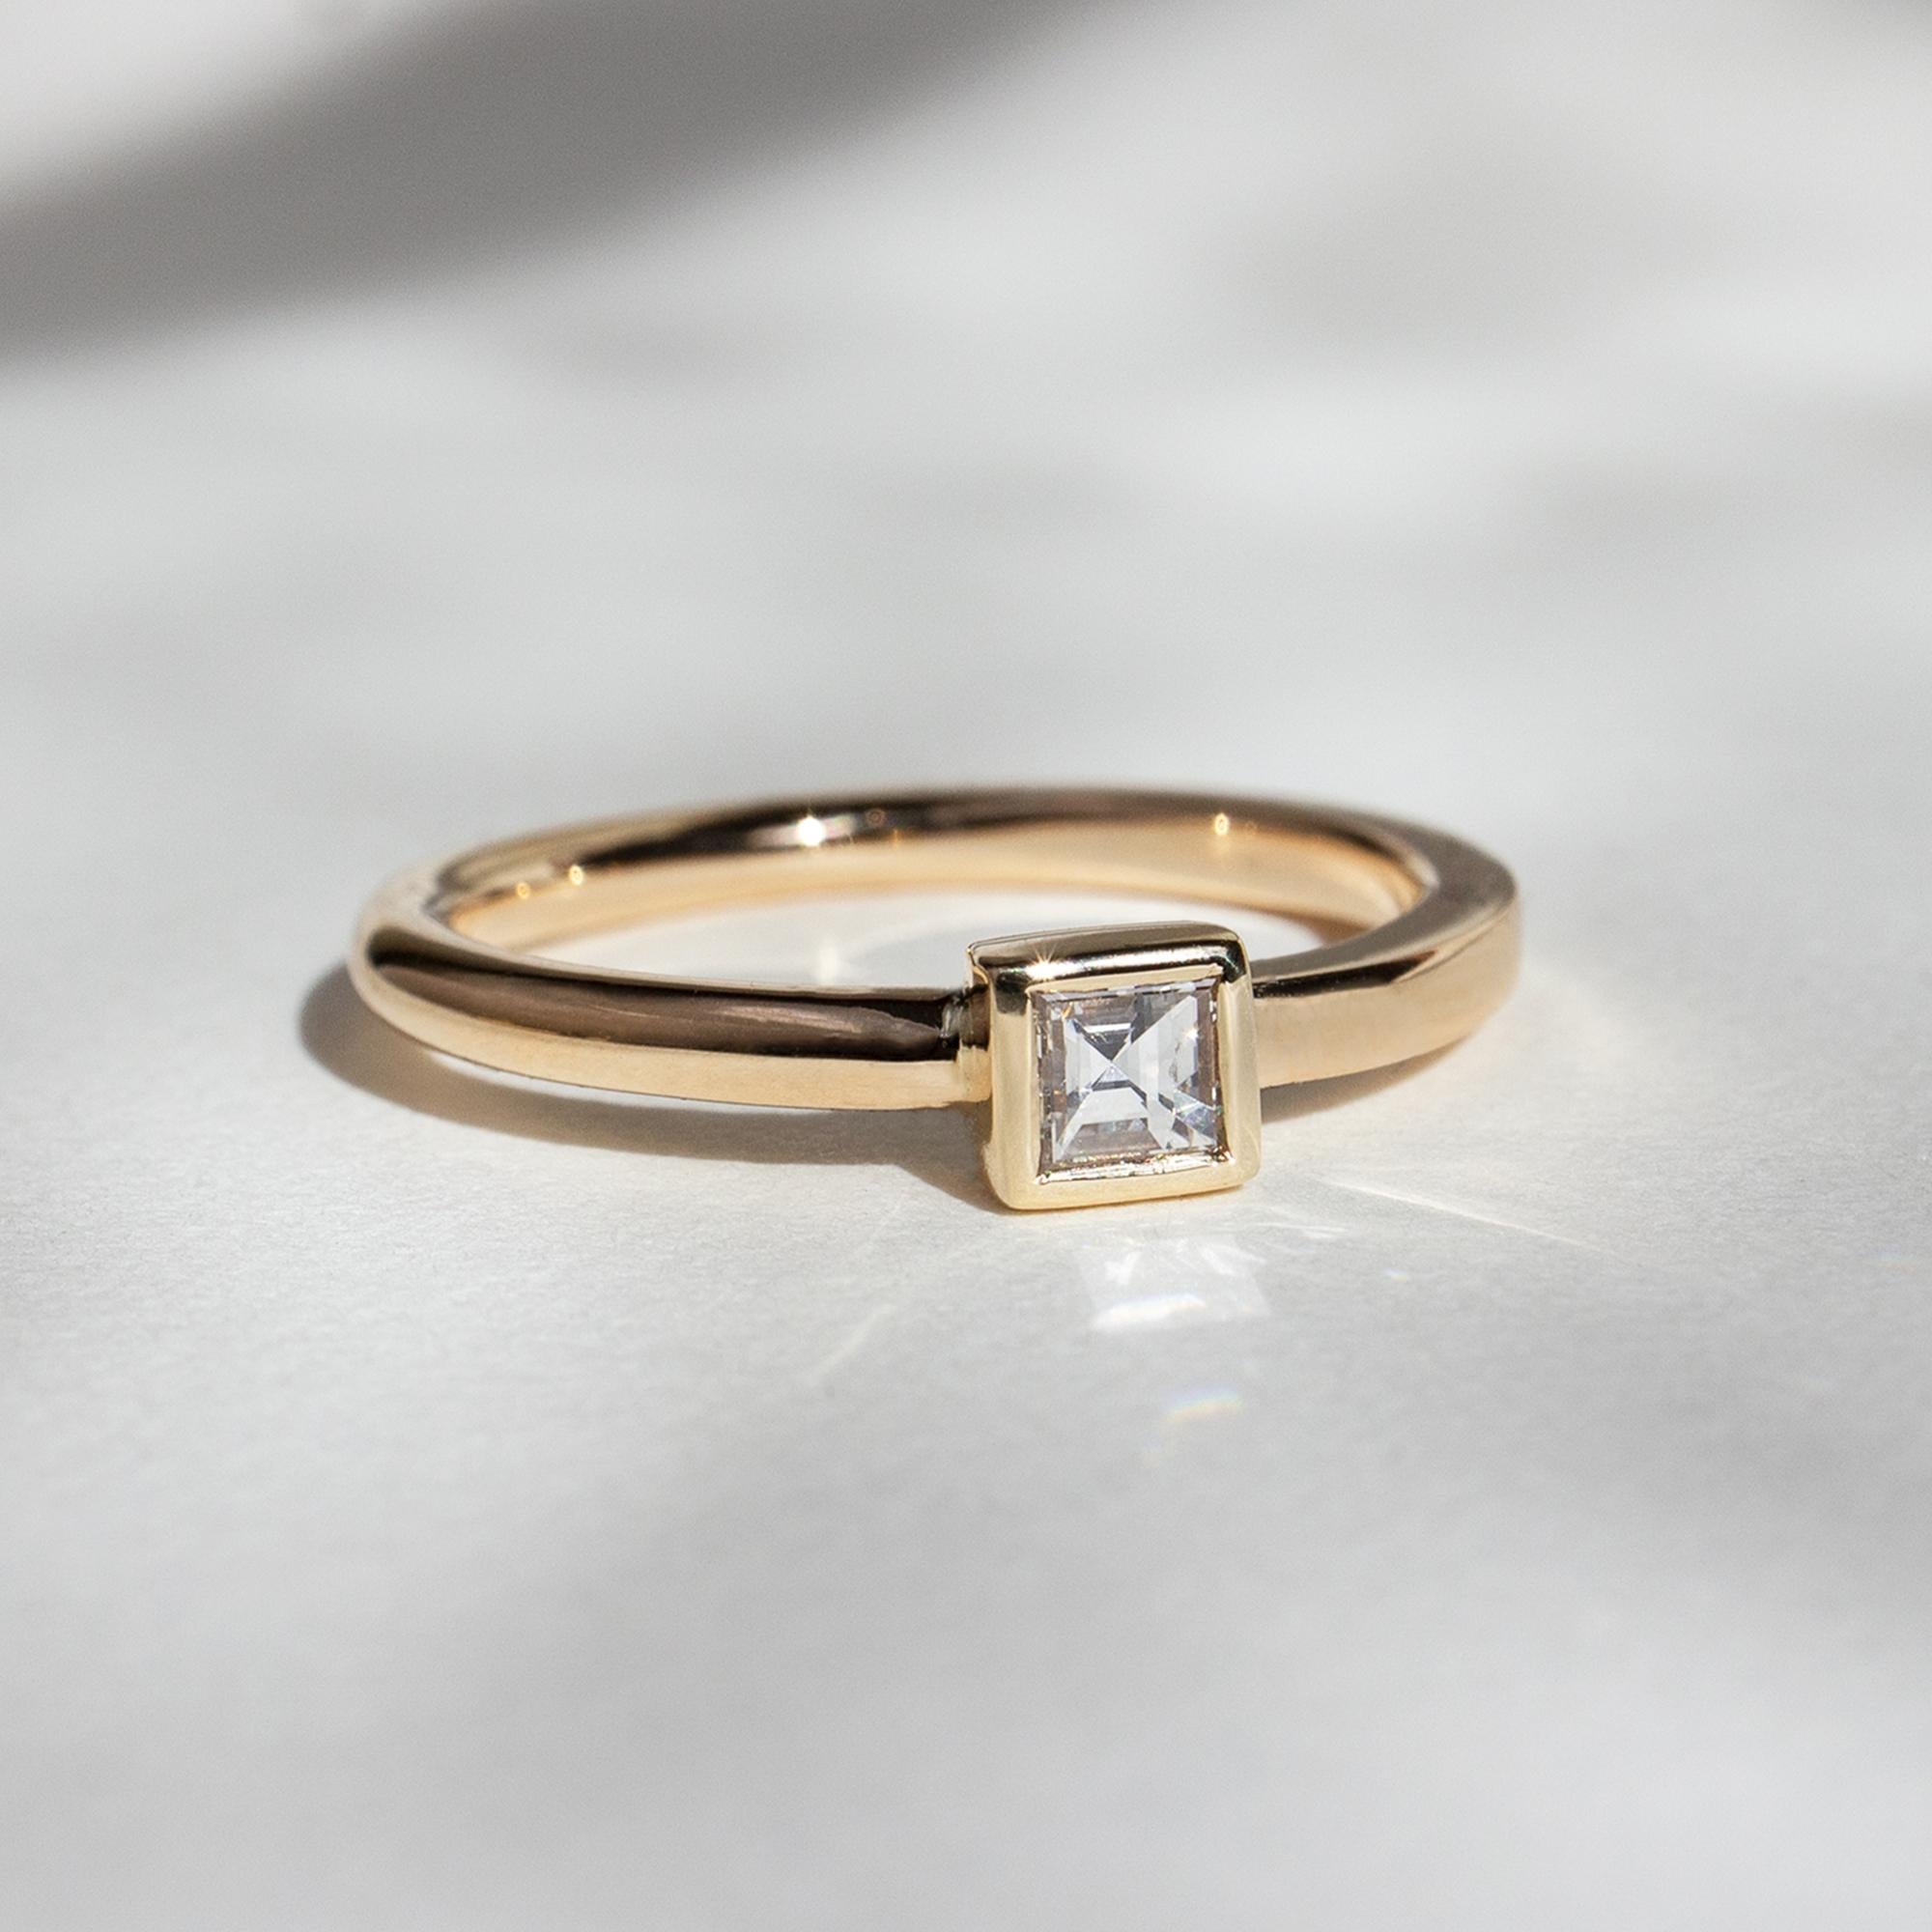 The dynamic band, an M. Hisae signature, now as a stand-out solitaire. A beautiful genesis of movement out of static, geometric forms. The Carré Cut is an original antique.

14K YELLOW GOLD
US RING SIZE 6
READY TO SHIP
*Resizing may be possible.